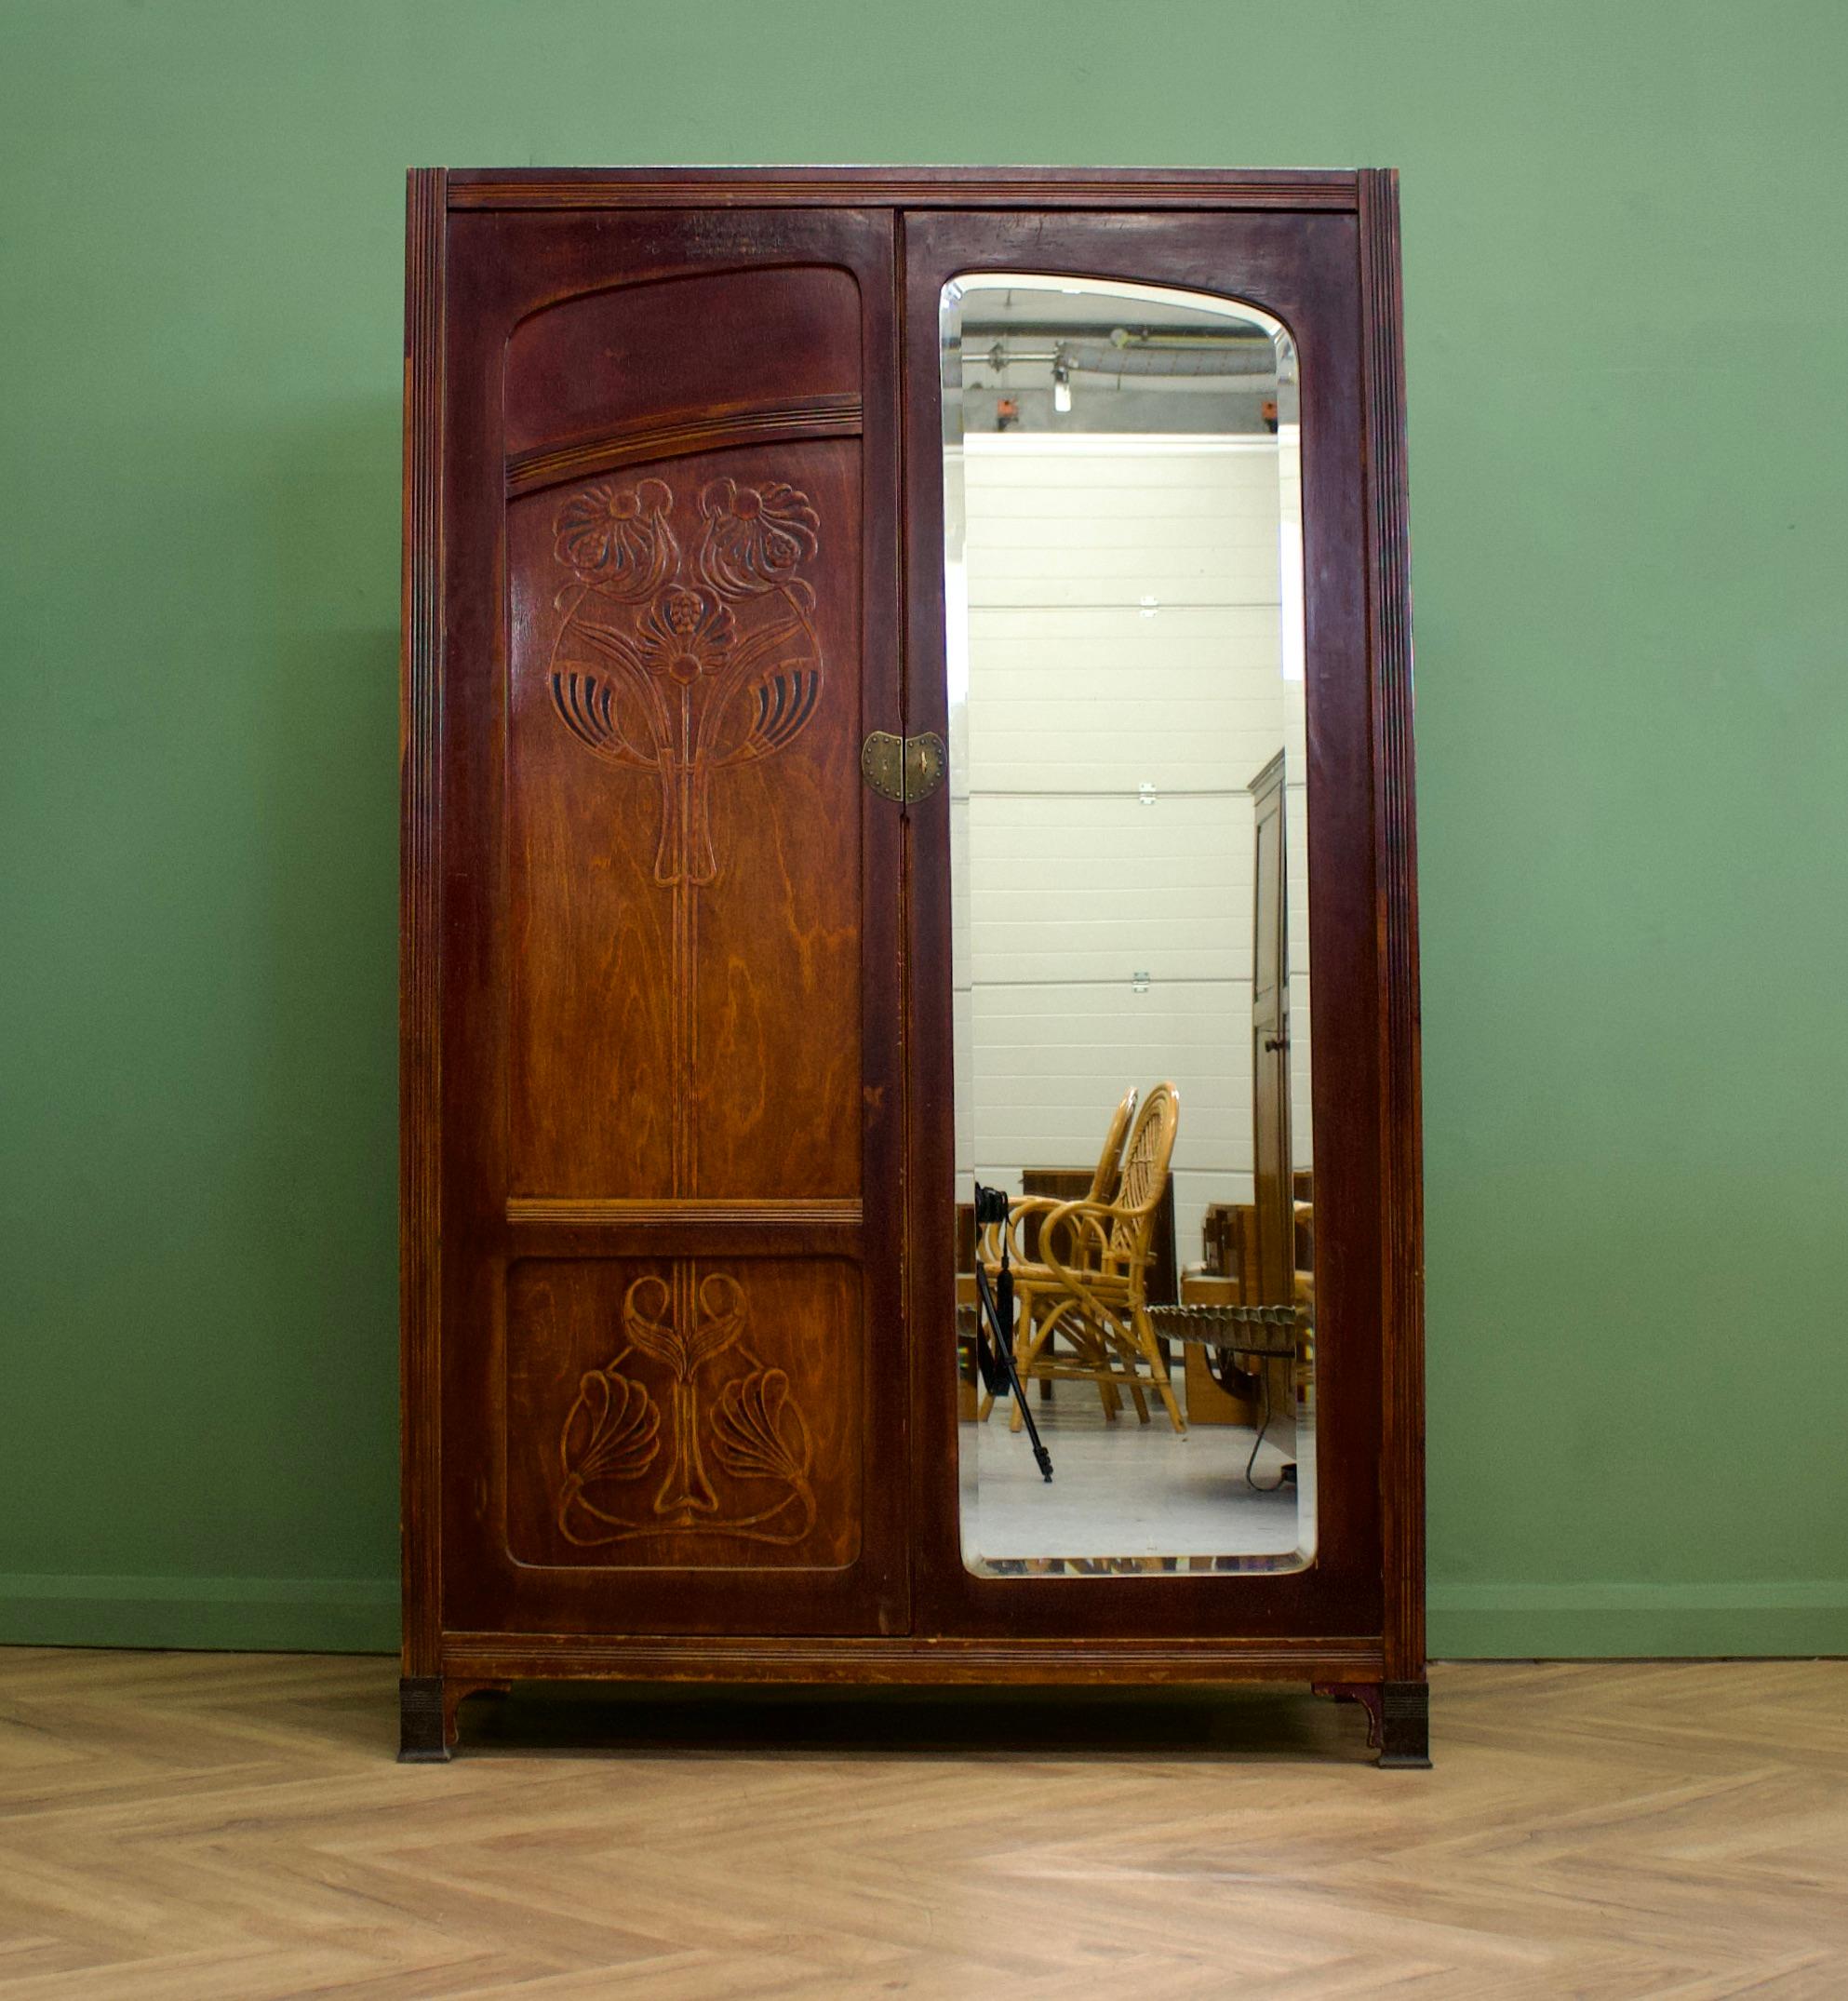 An impressive Austrian Art Nouveau wardrobe designed by J & J Kohn, circa 1900's
Featuring a full length mirror and brass details externally
Internally there is a hanging rail and shelves